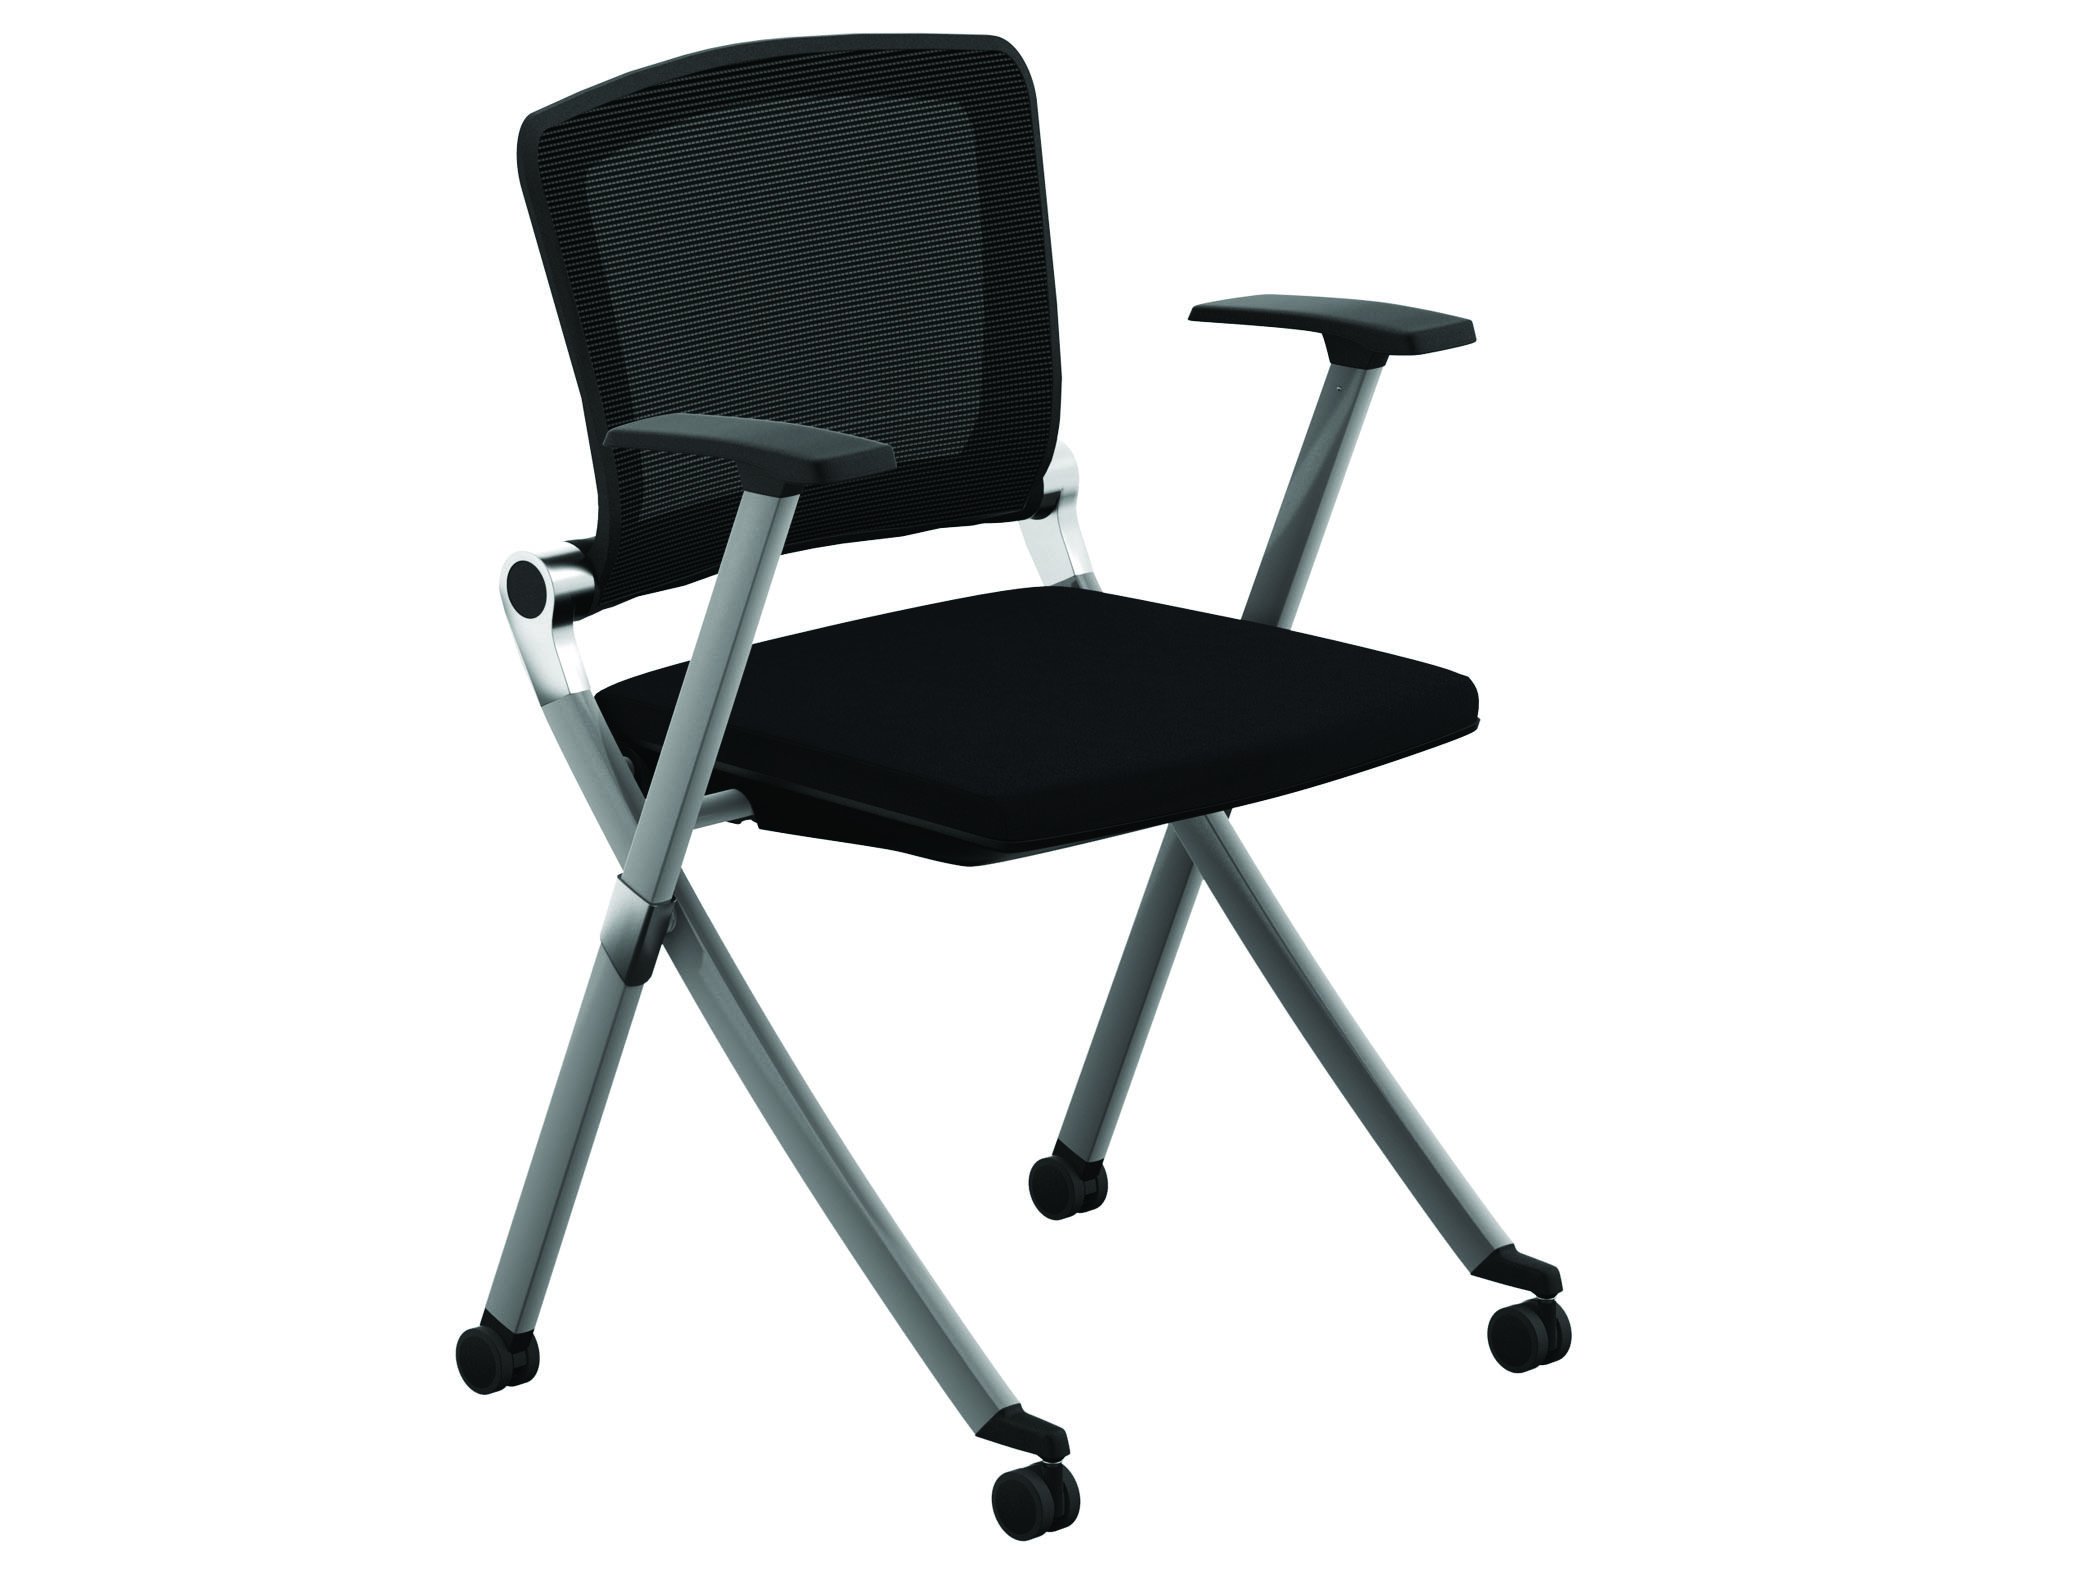 Training Room Furniture from Compel - Ziggy chair